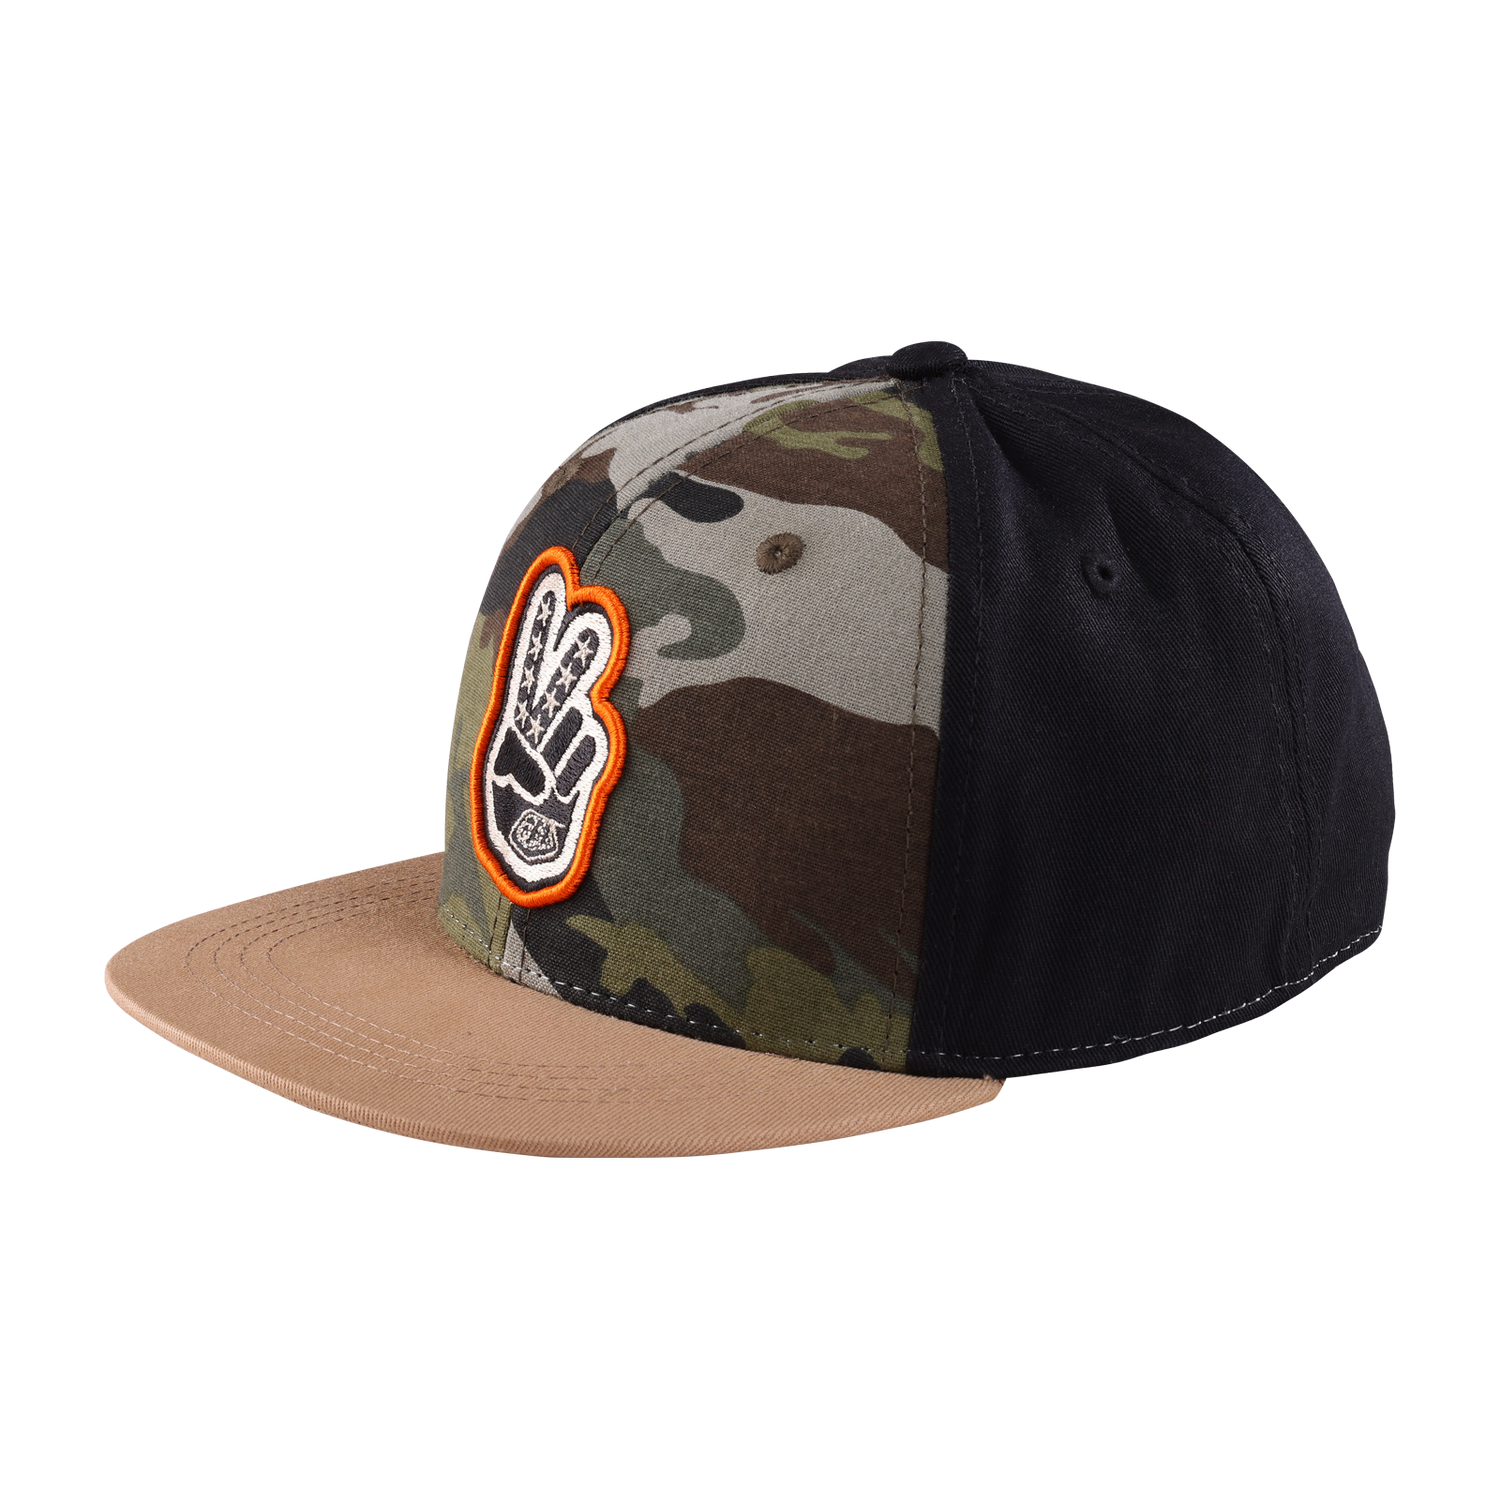 TLD Youth Flat Bill Snapback Peace Out Black / Forest Camo